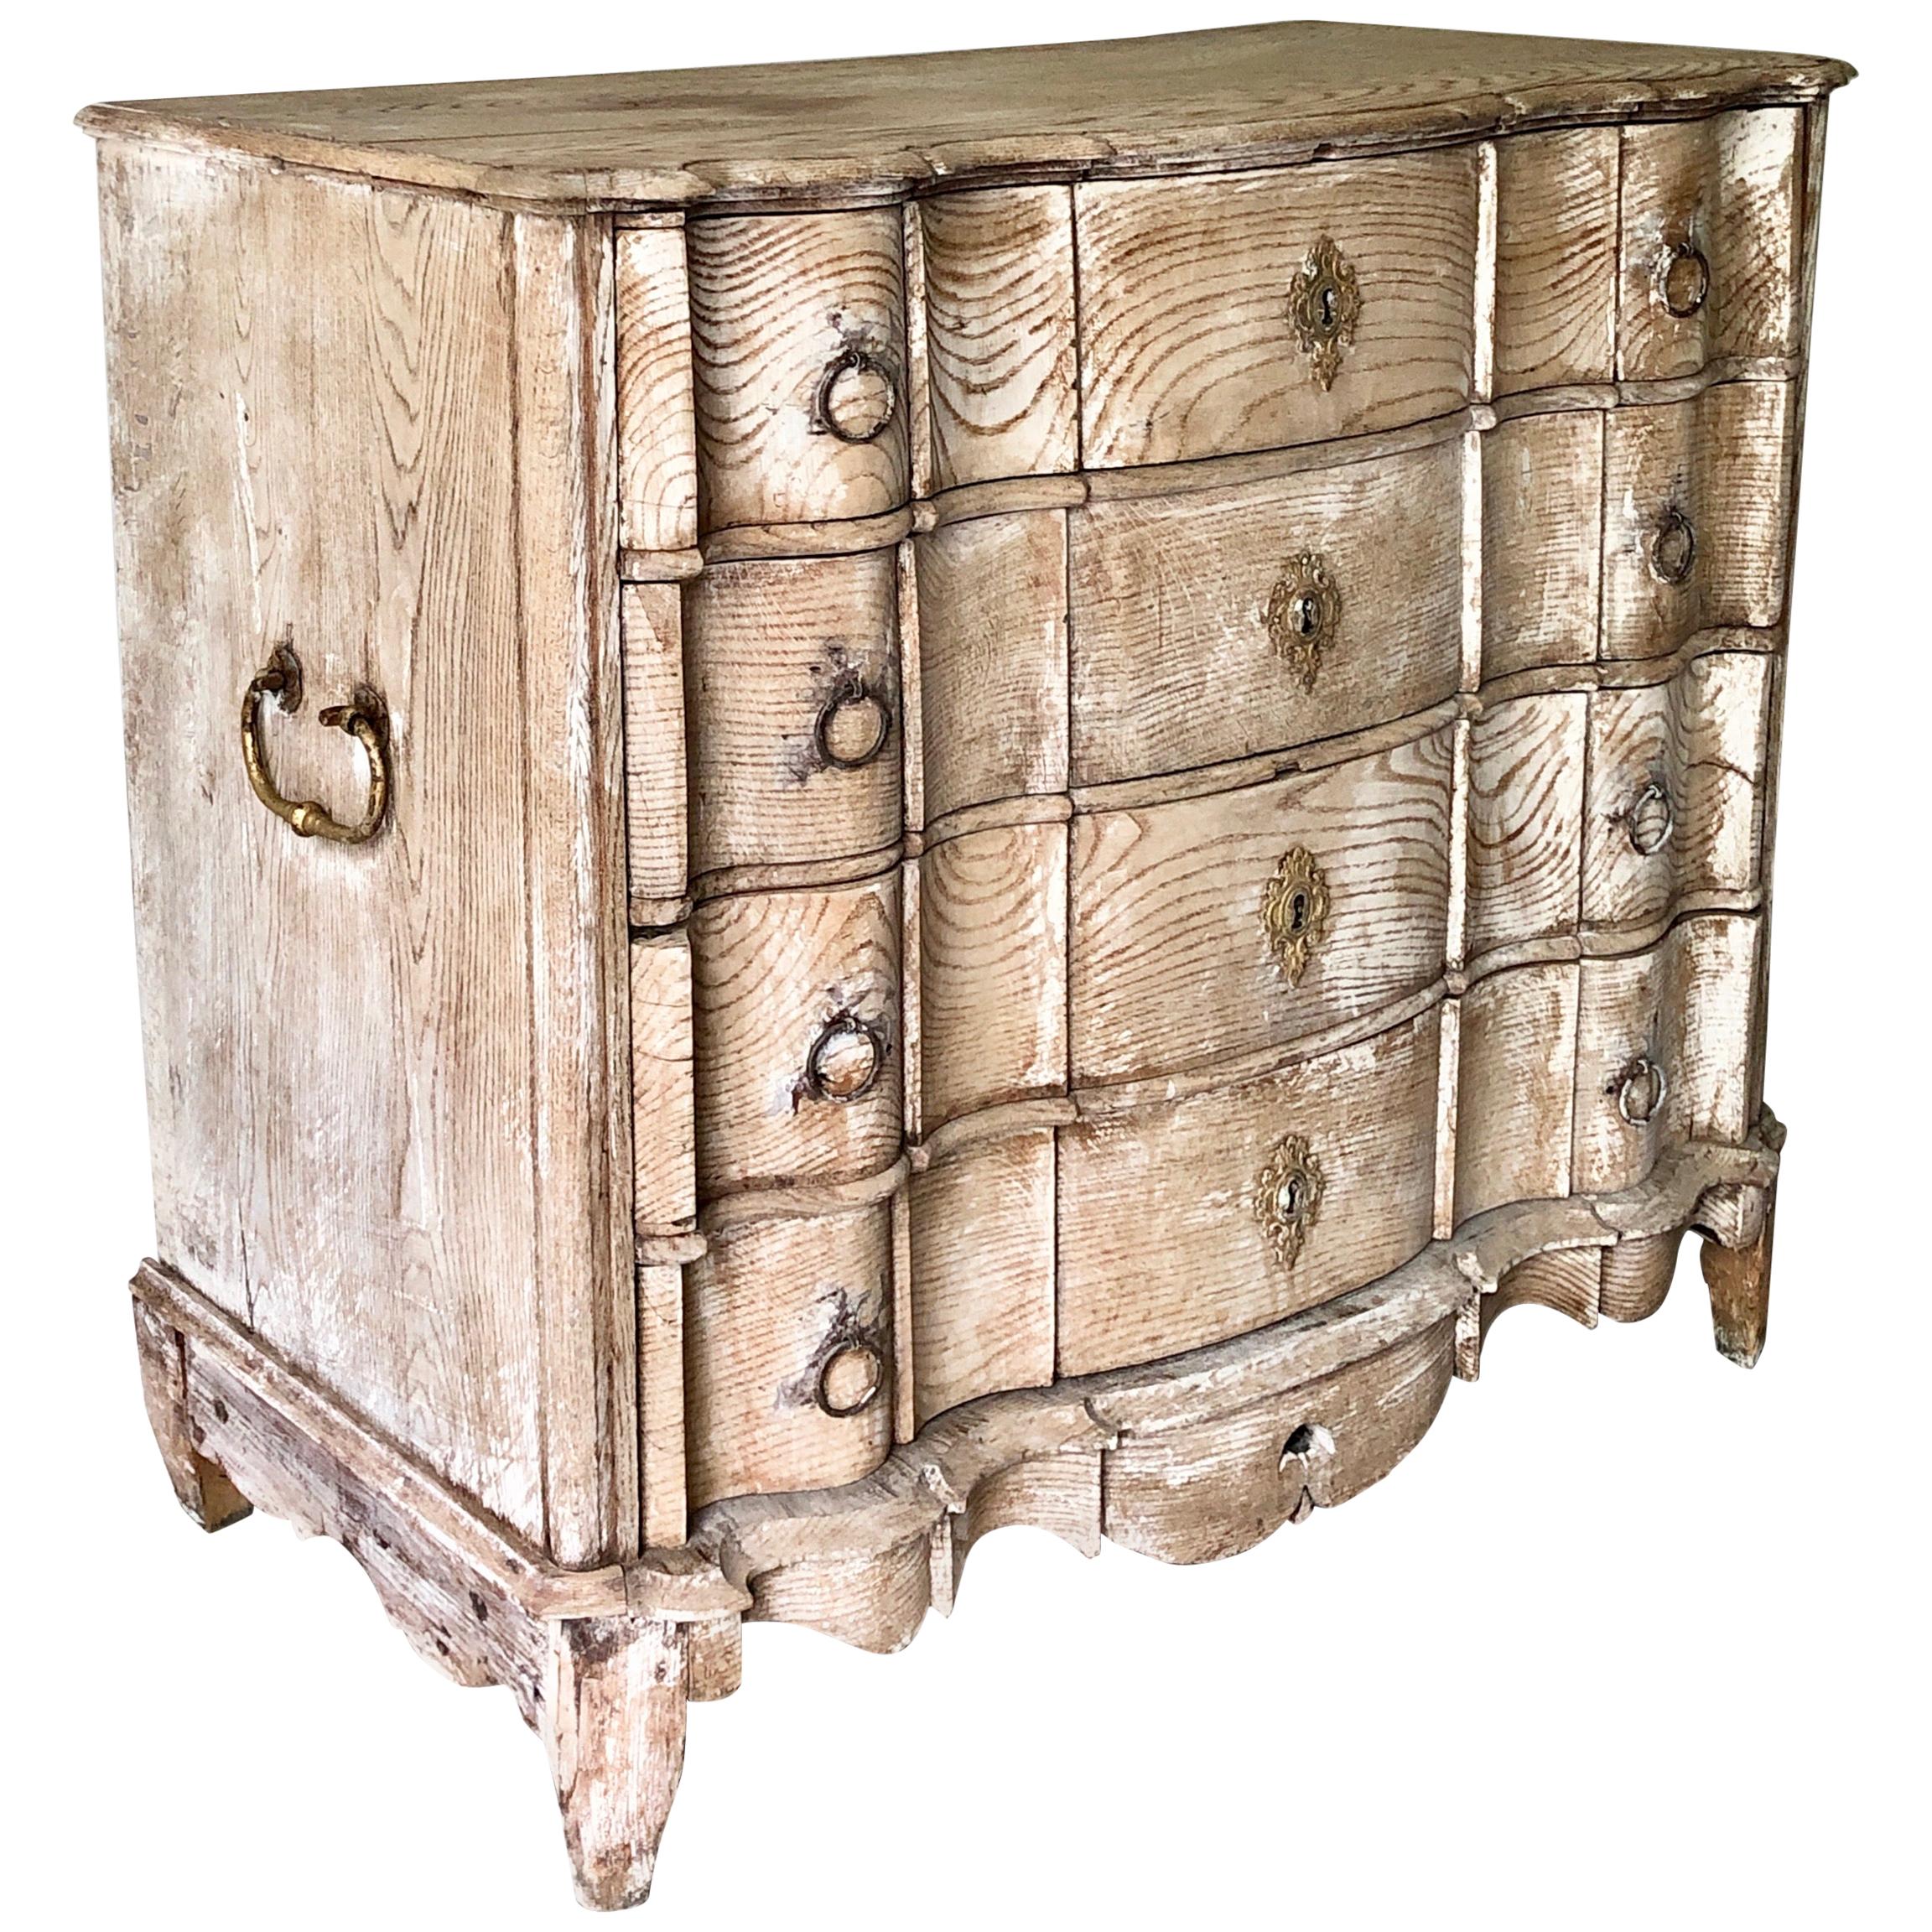 18th Century Dutch Serpentine Front Chest of Drawers